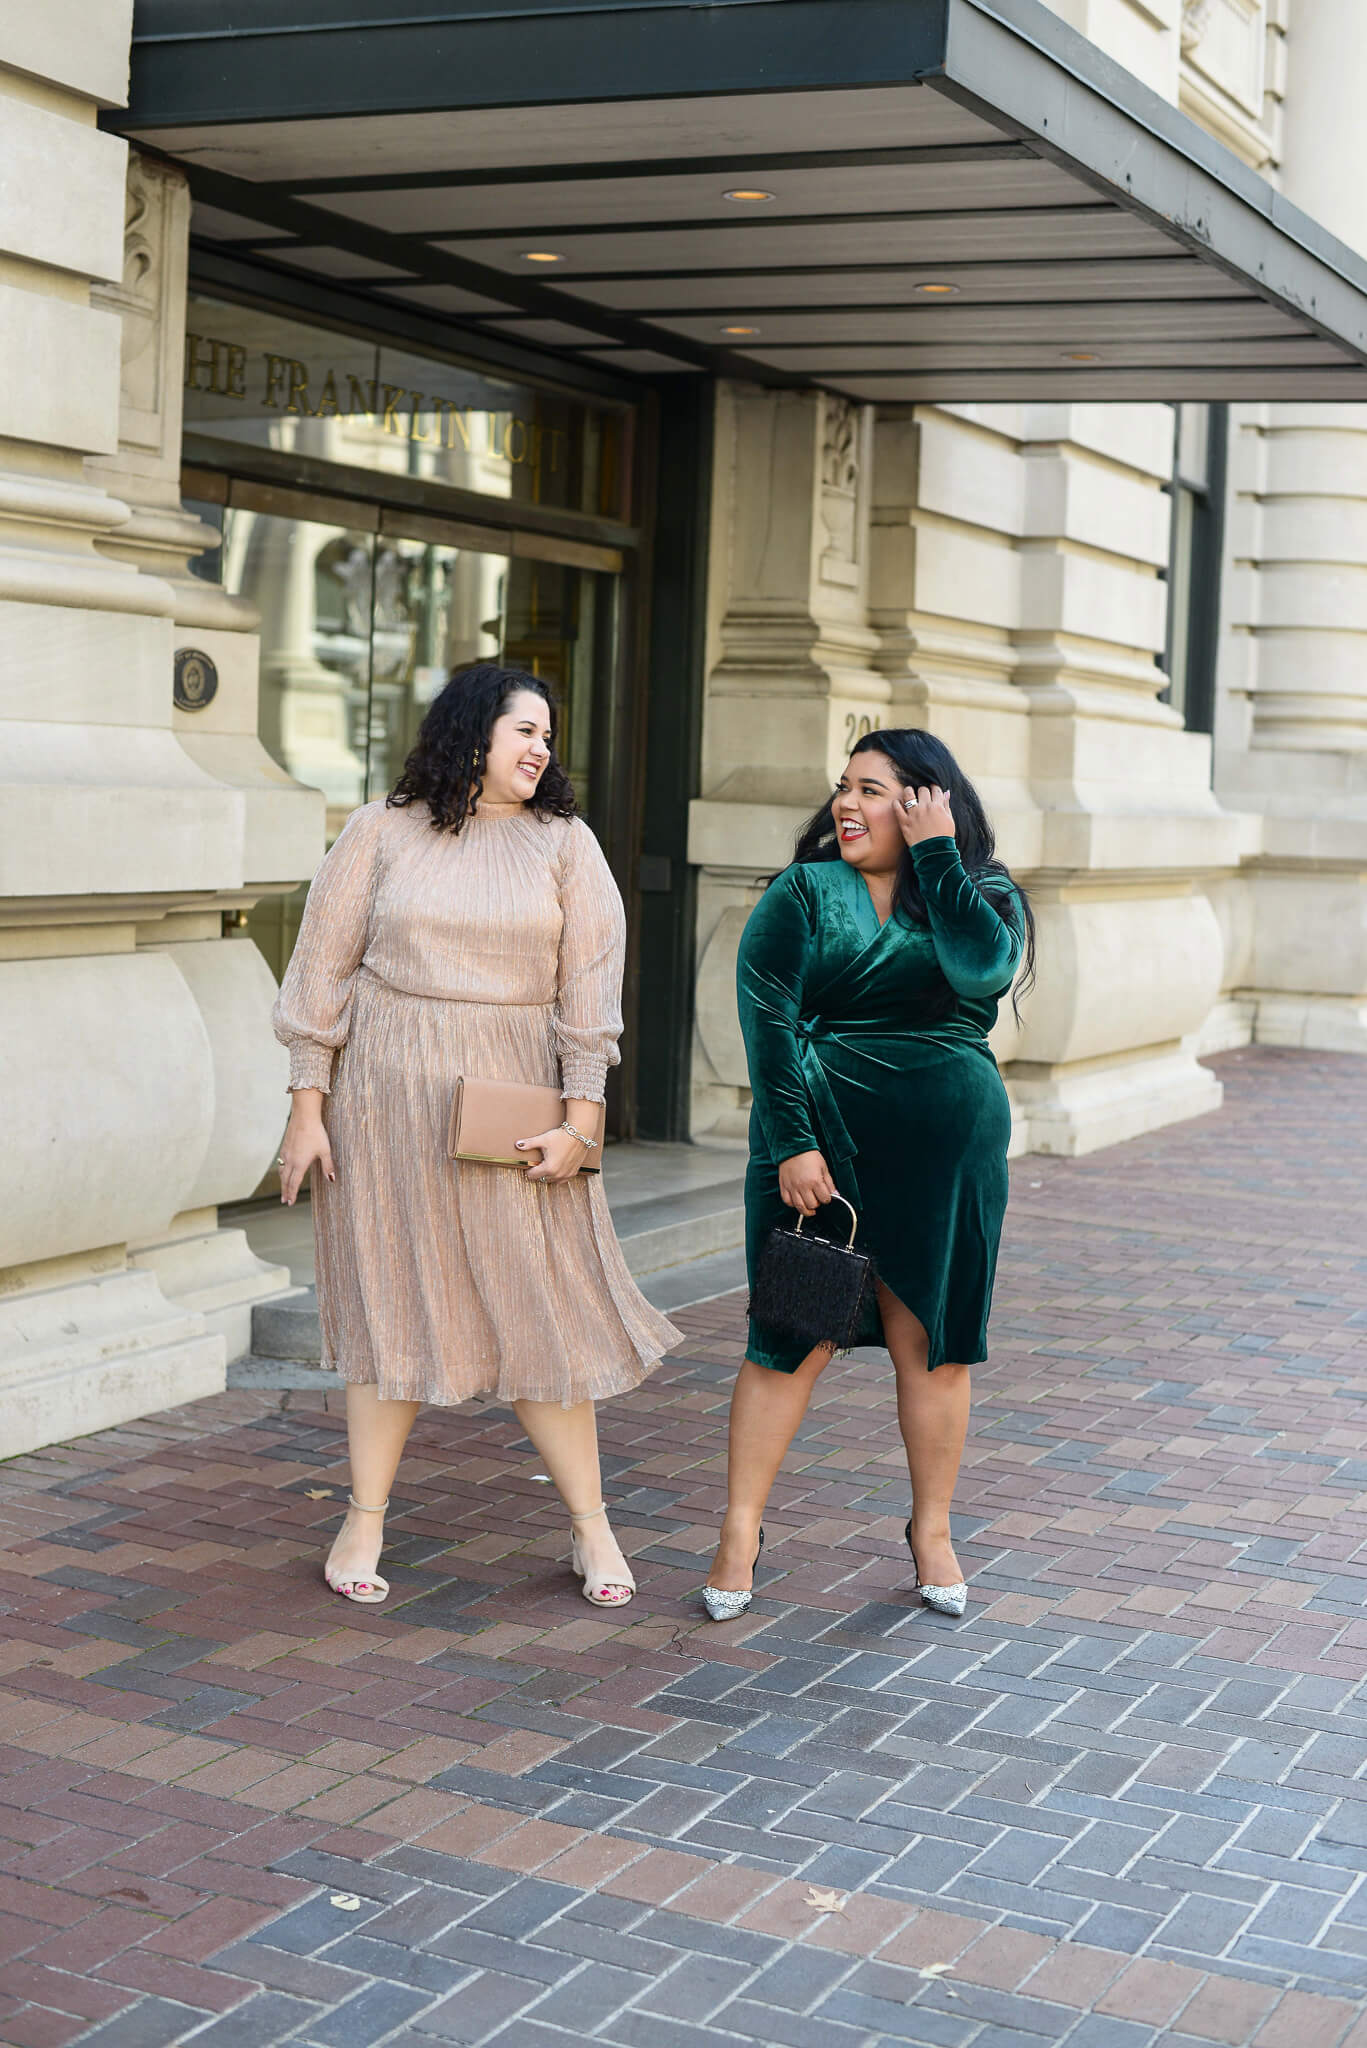 I'll be celebrating New Year's Eve with my besties in this blush metallic plus size dress